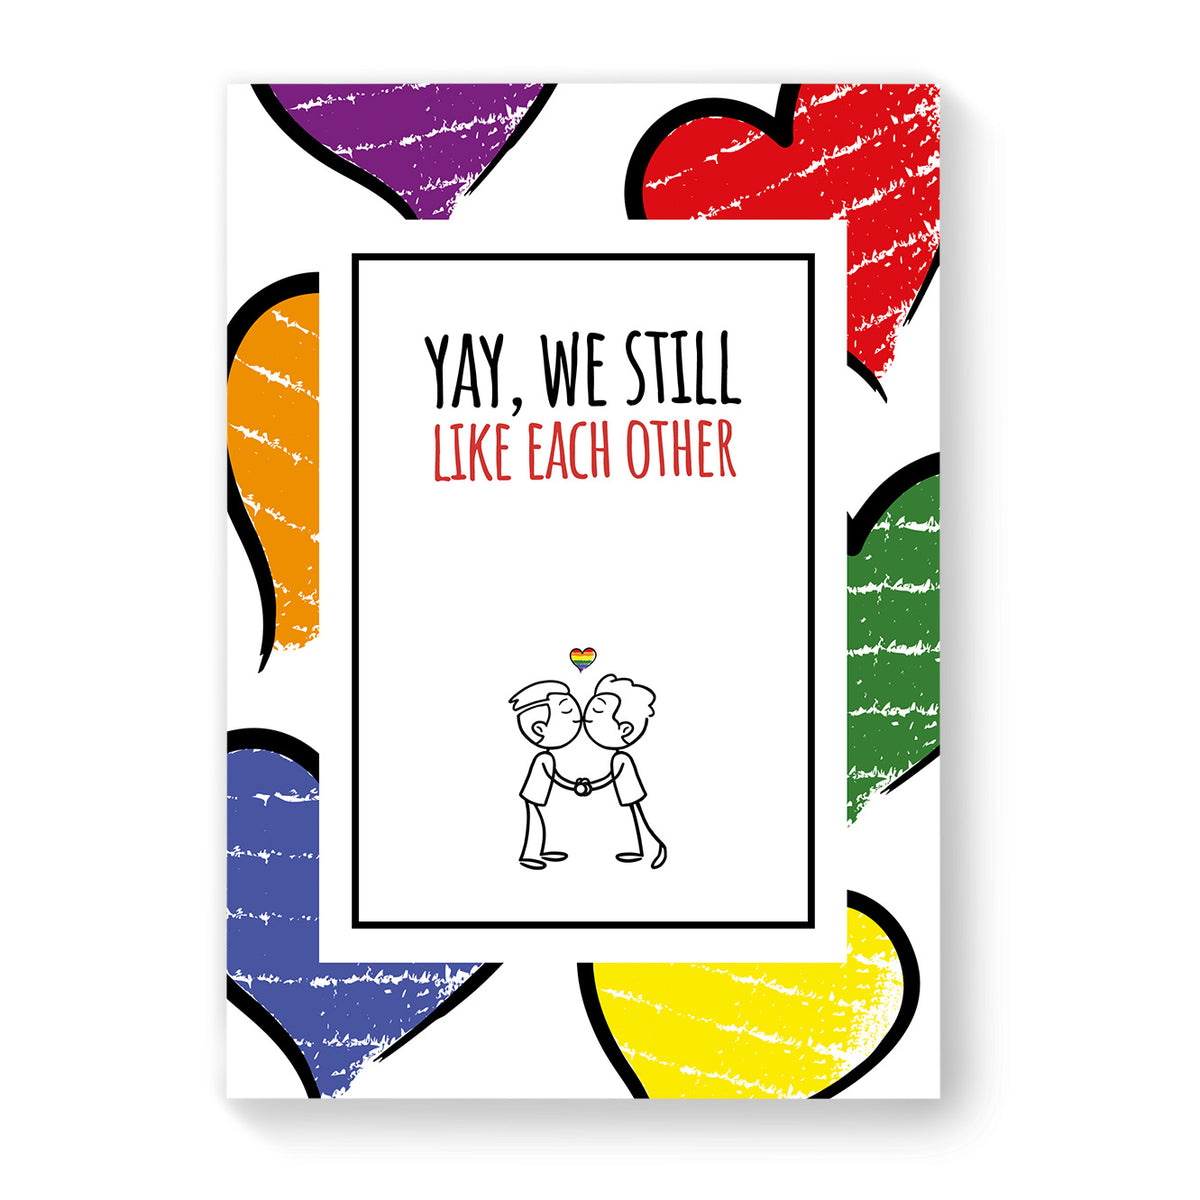 Yay, we still like each other - Gay Couple Card - Large Heart | Gift